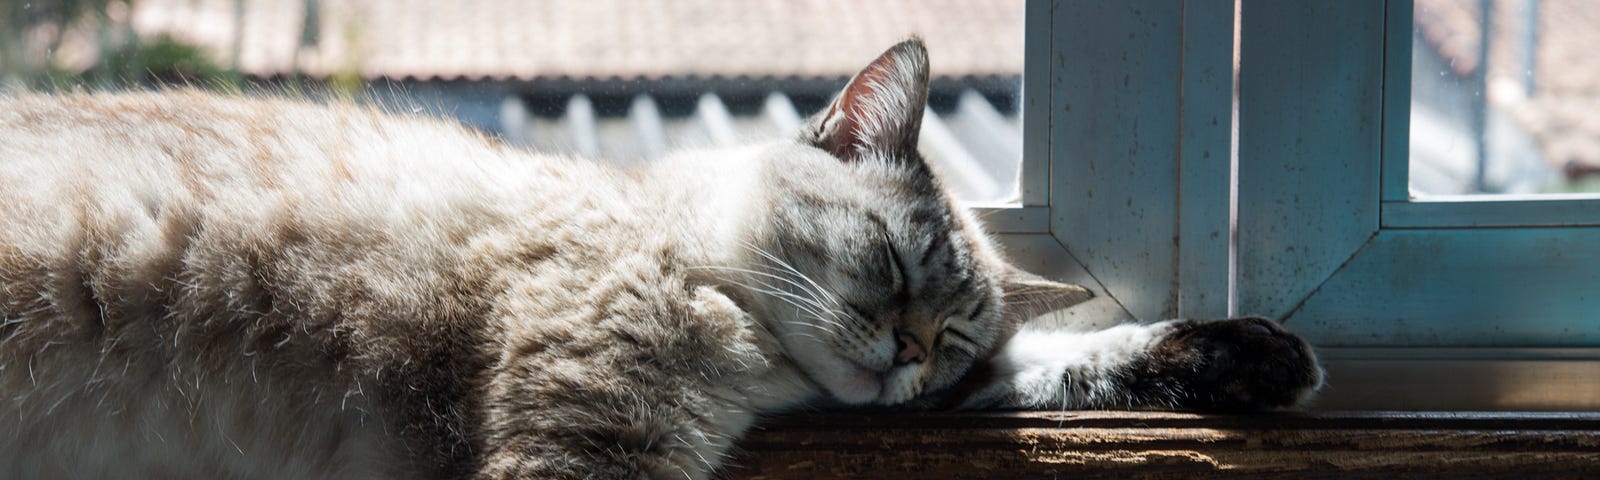 This photo shows a cat sleeping in front of a window.